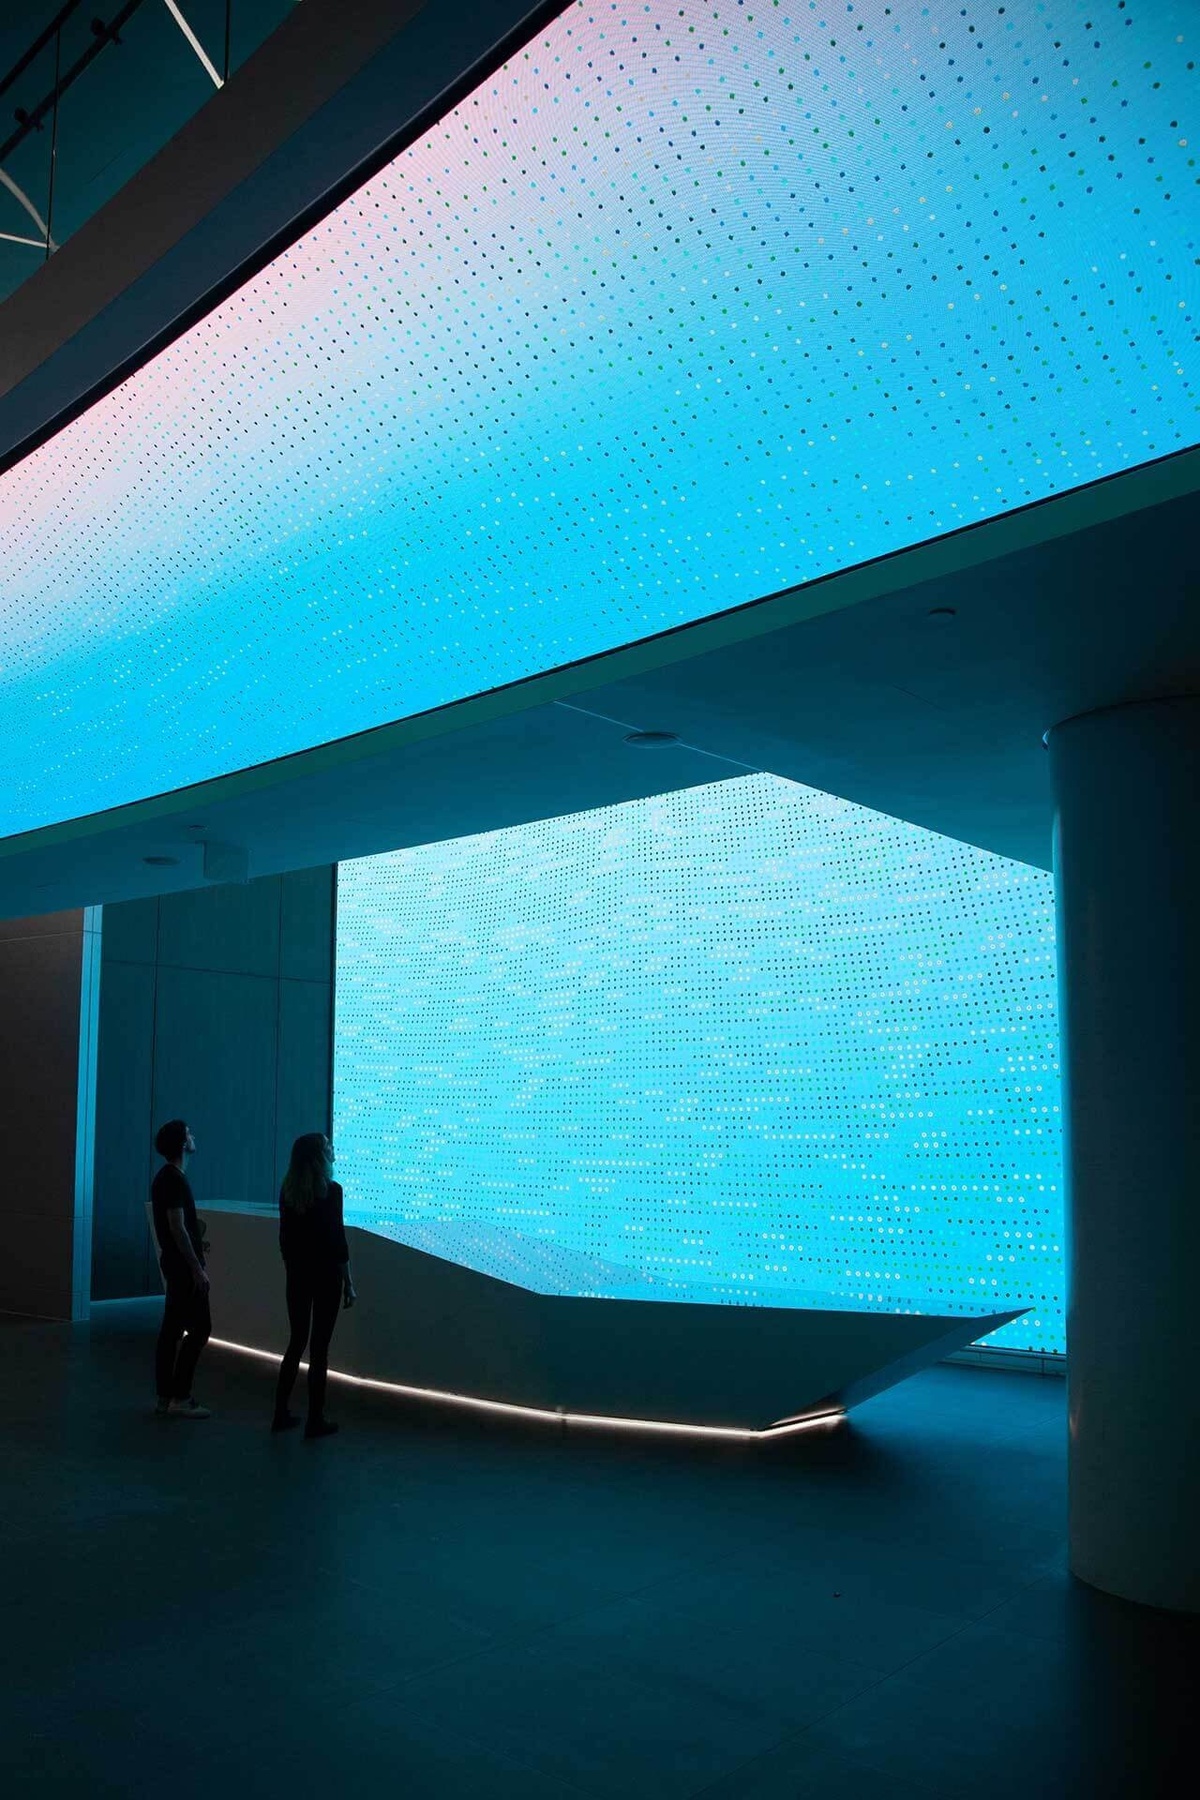 Photograph of finished environment, with data visualization patterns on large screen that covers the wall of the space and runs above the heads of people